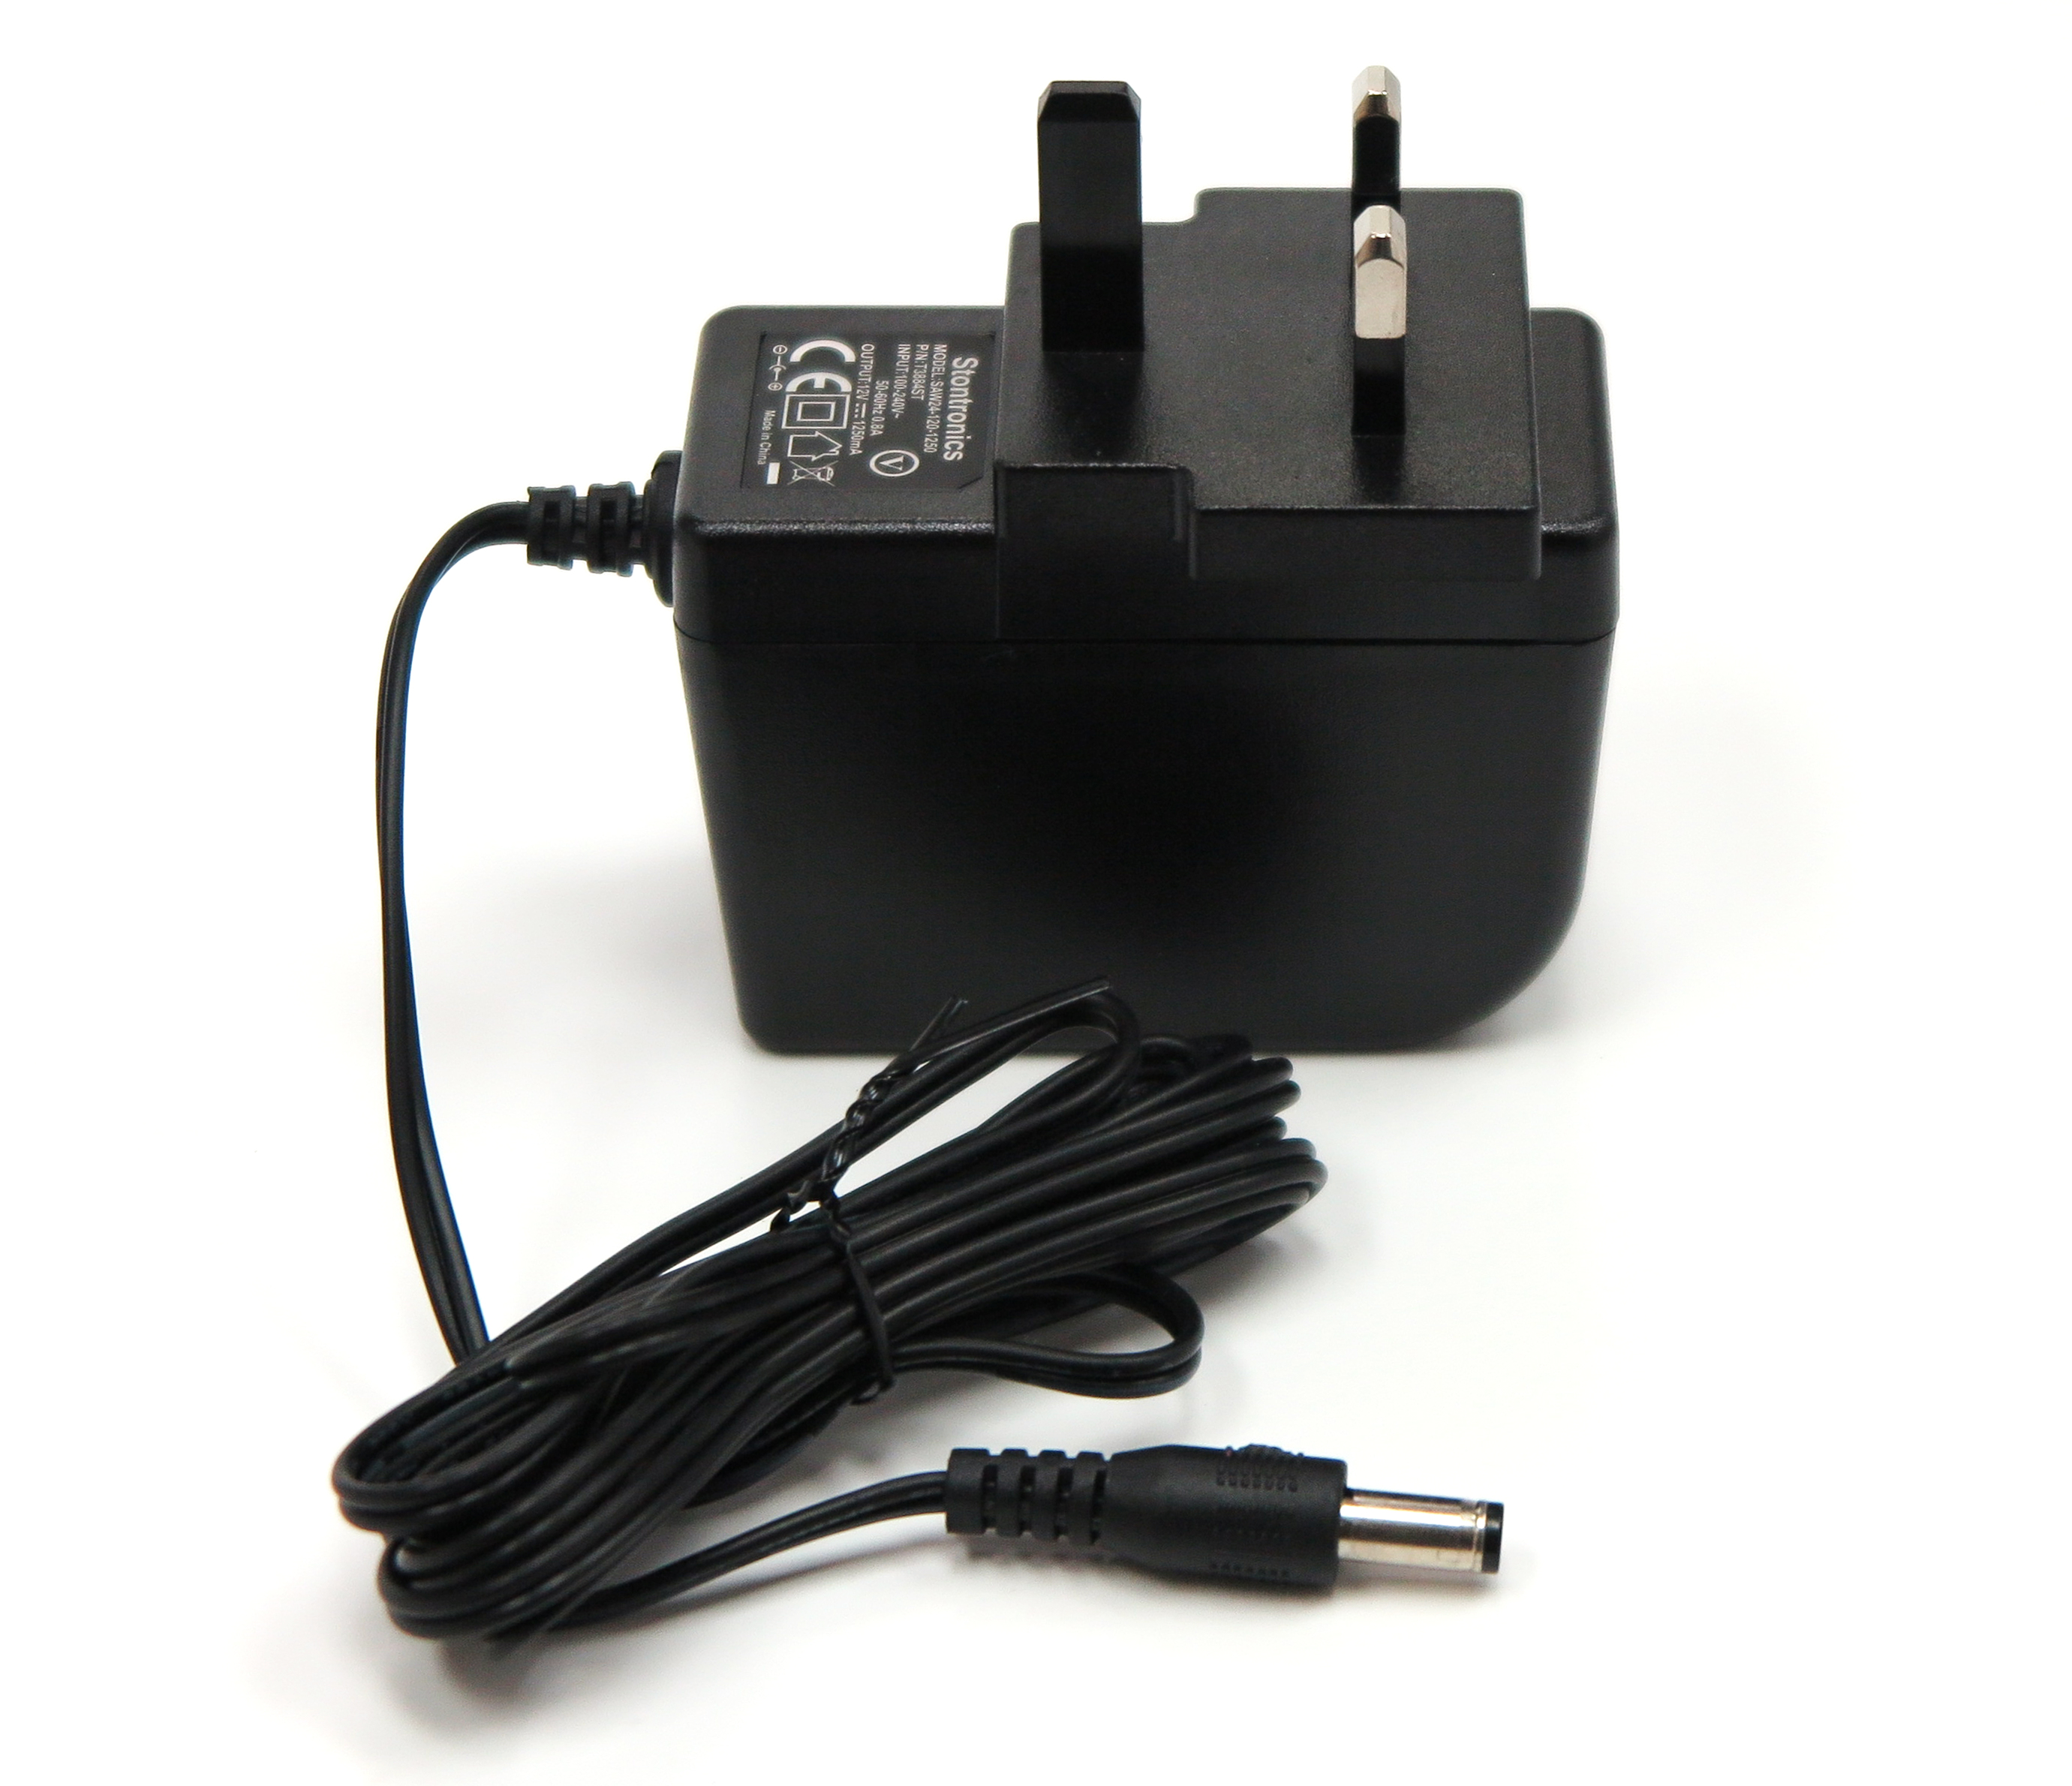 Turntable Motor and Power Supply Replacement - Money Back Guarantee